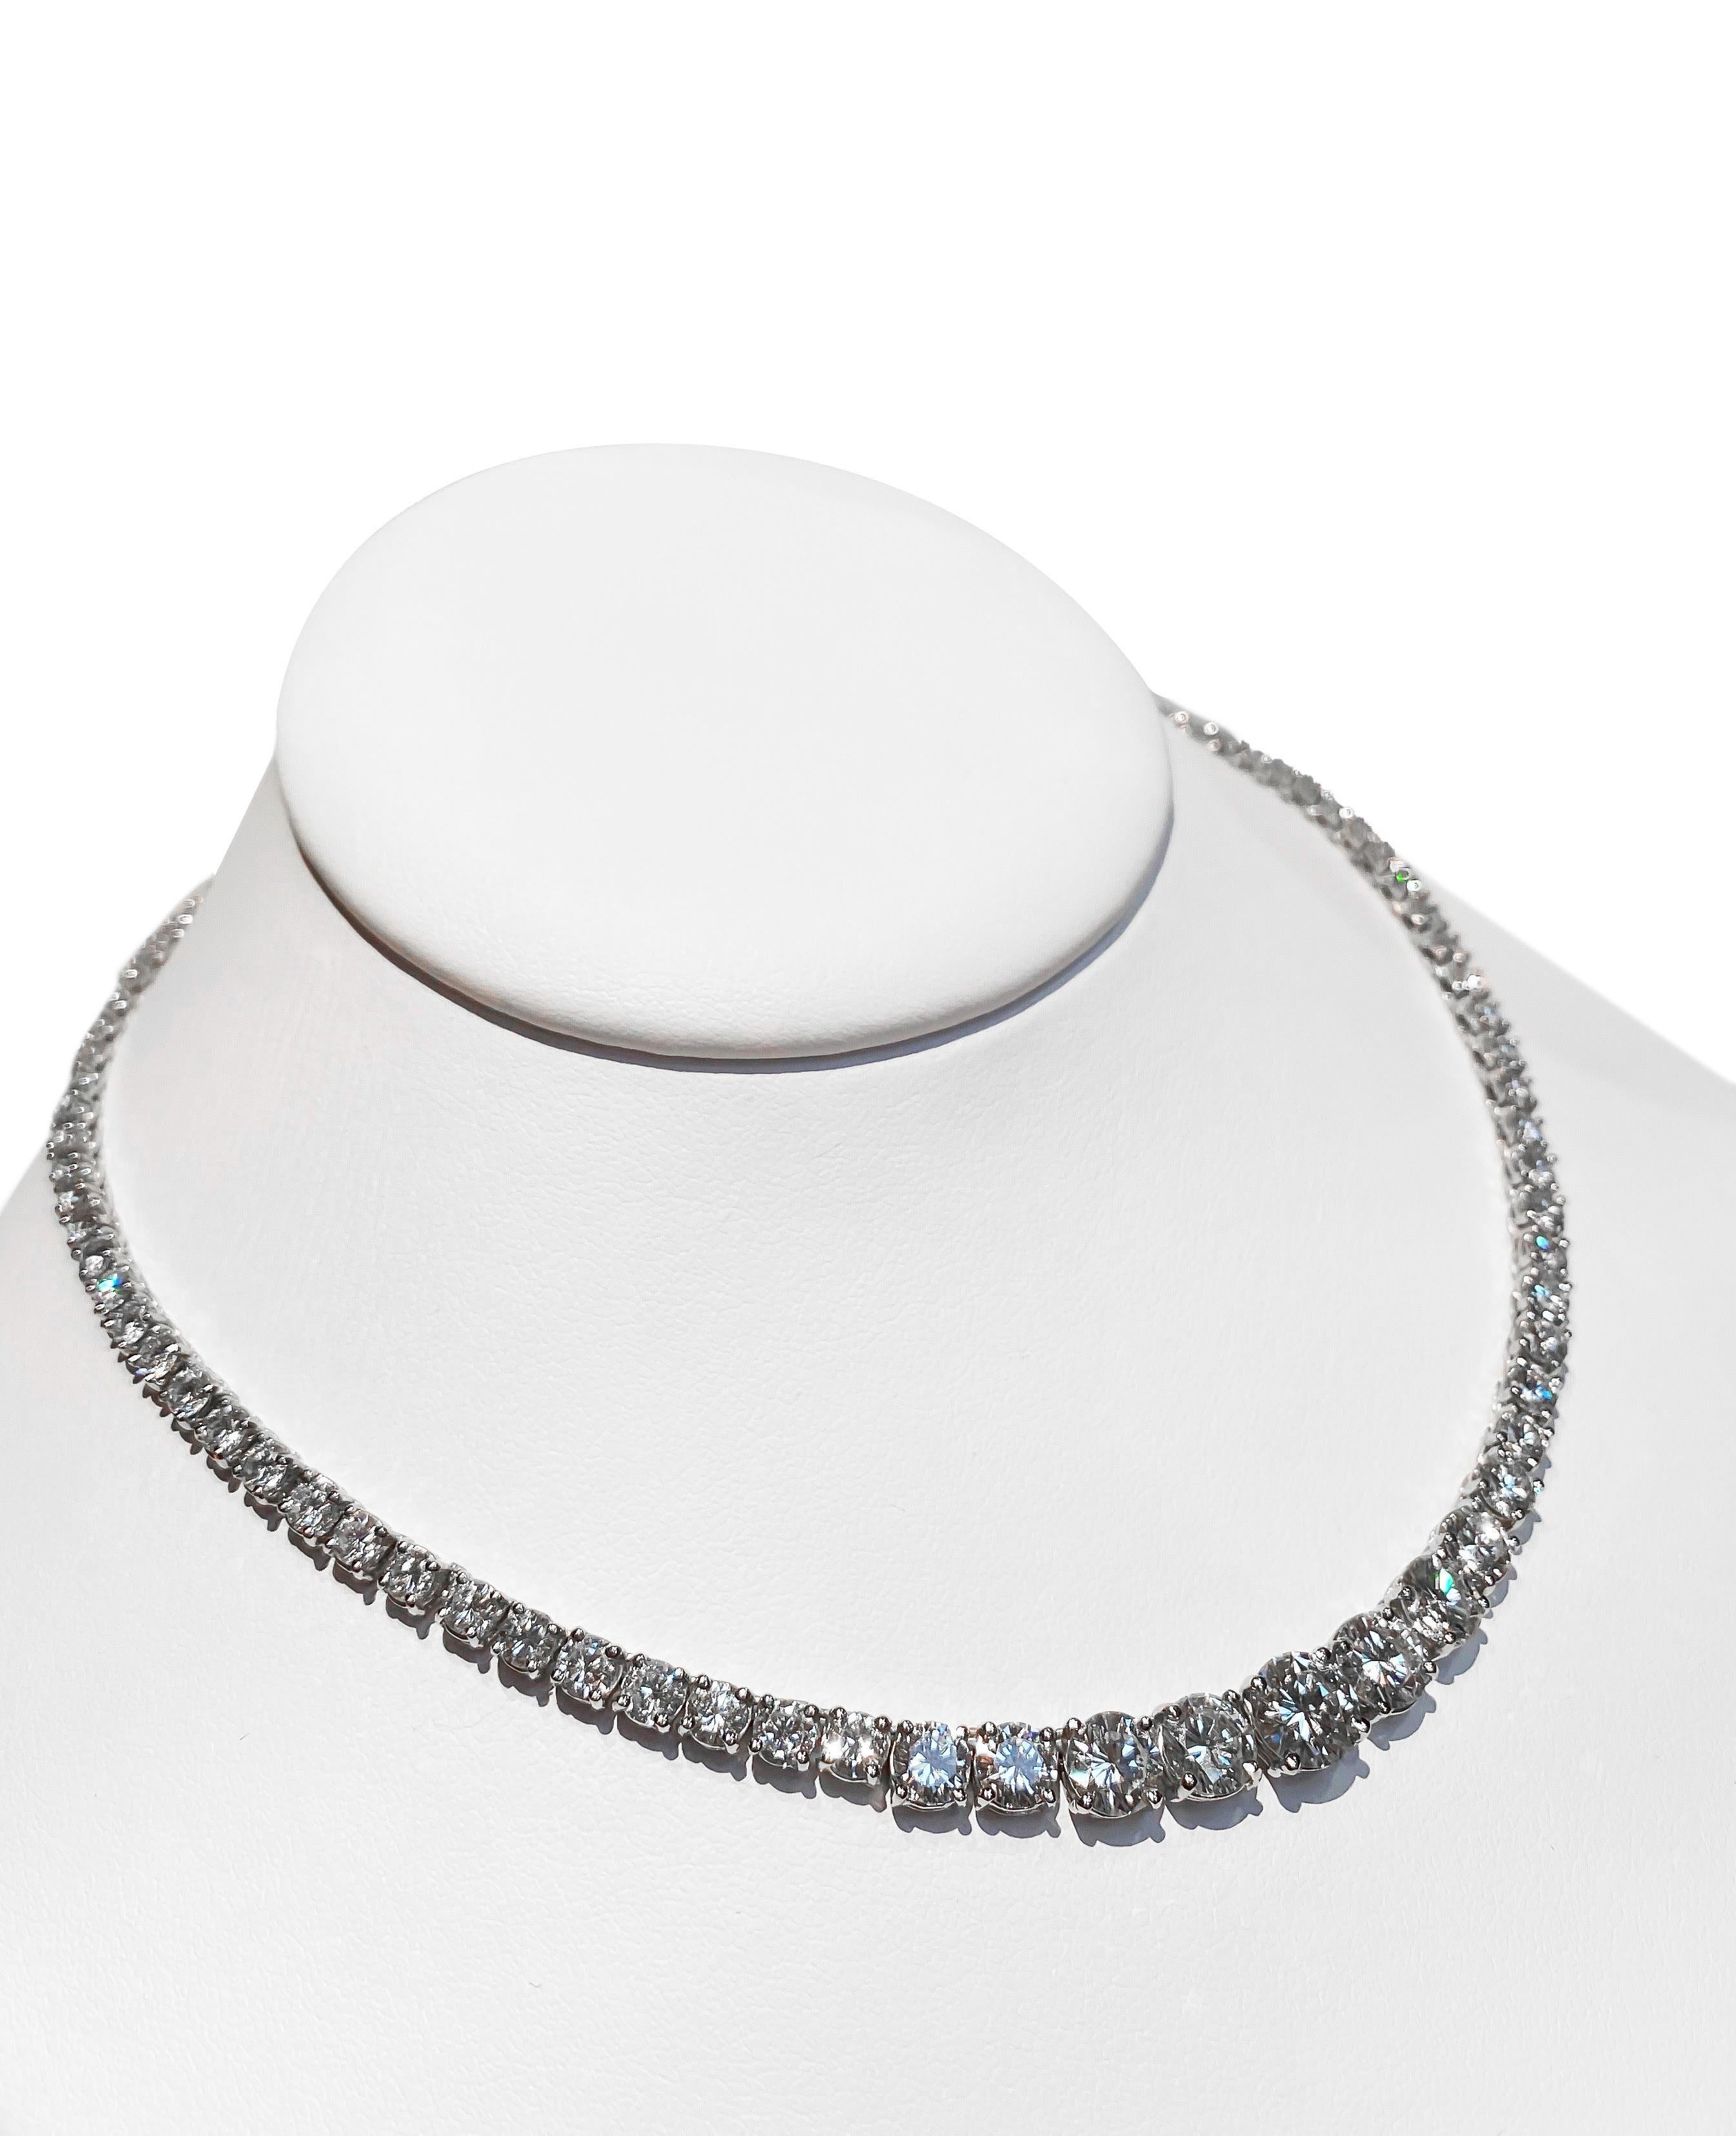 Crafted in Platinum Diamond Graduated Riviera Necklace with Round Brilliant Cut Diamonds G-J color, VS clarity. 
Elegance, Quality & Style all in one statement piece.

Viewings available in our wholesale office by appointment only.

We guarantee all